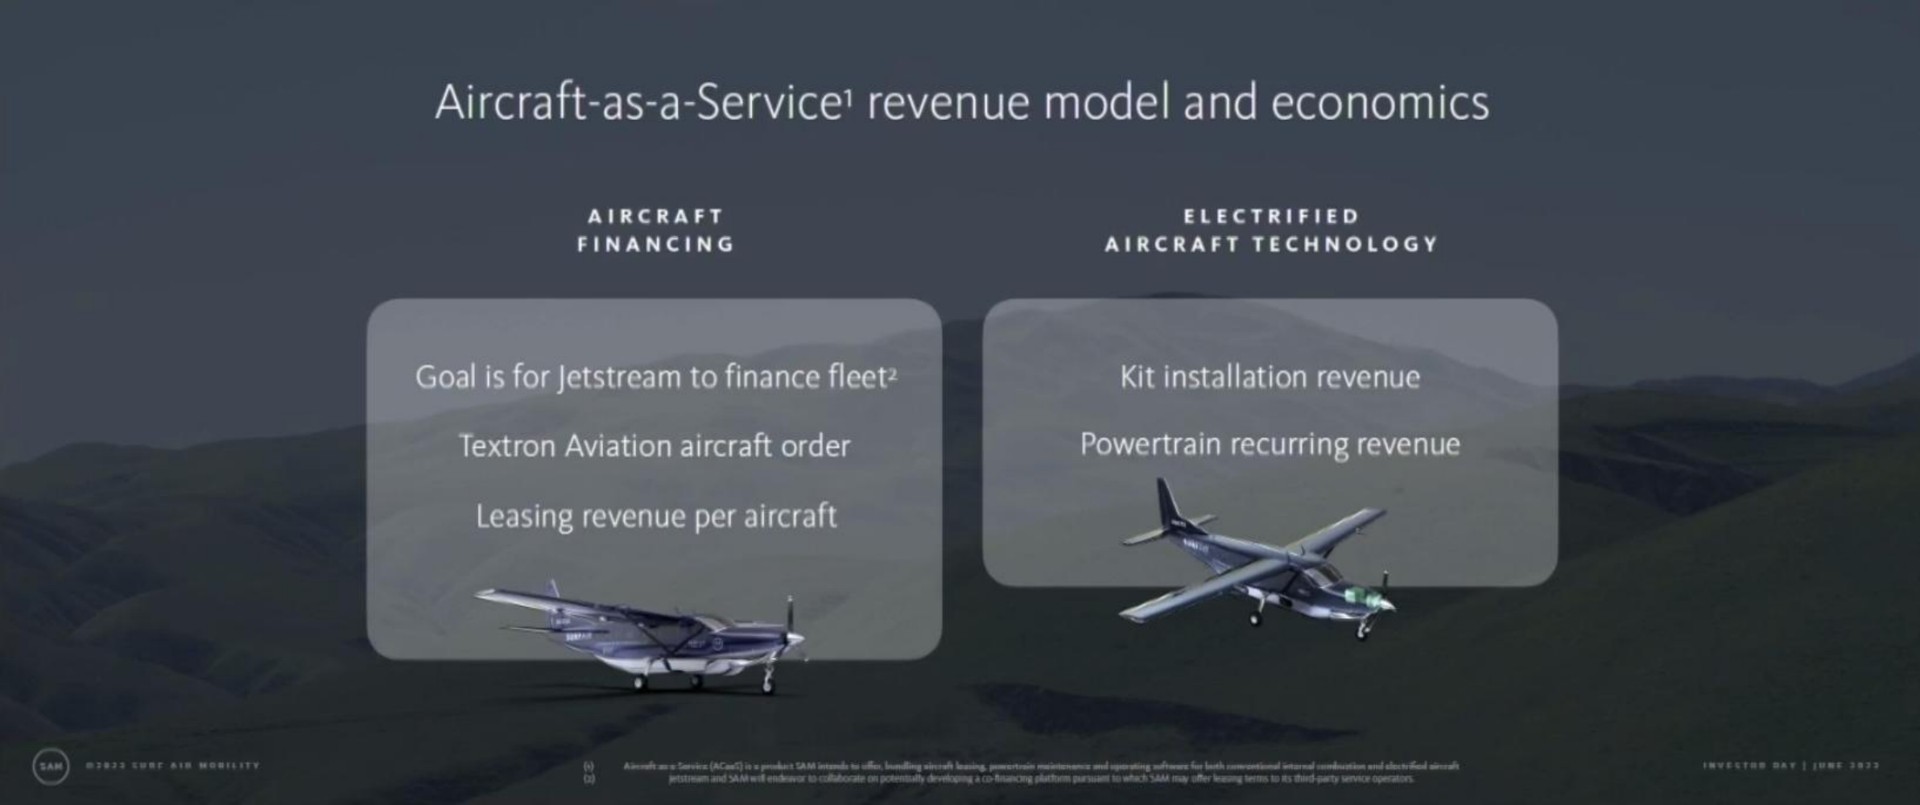 aircraft as a service revenue model and economics electrified a financing aircraft technology see alo ewe cee eer i a a | Surf Air